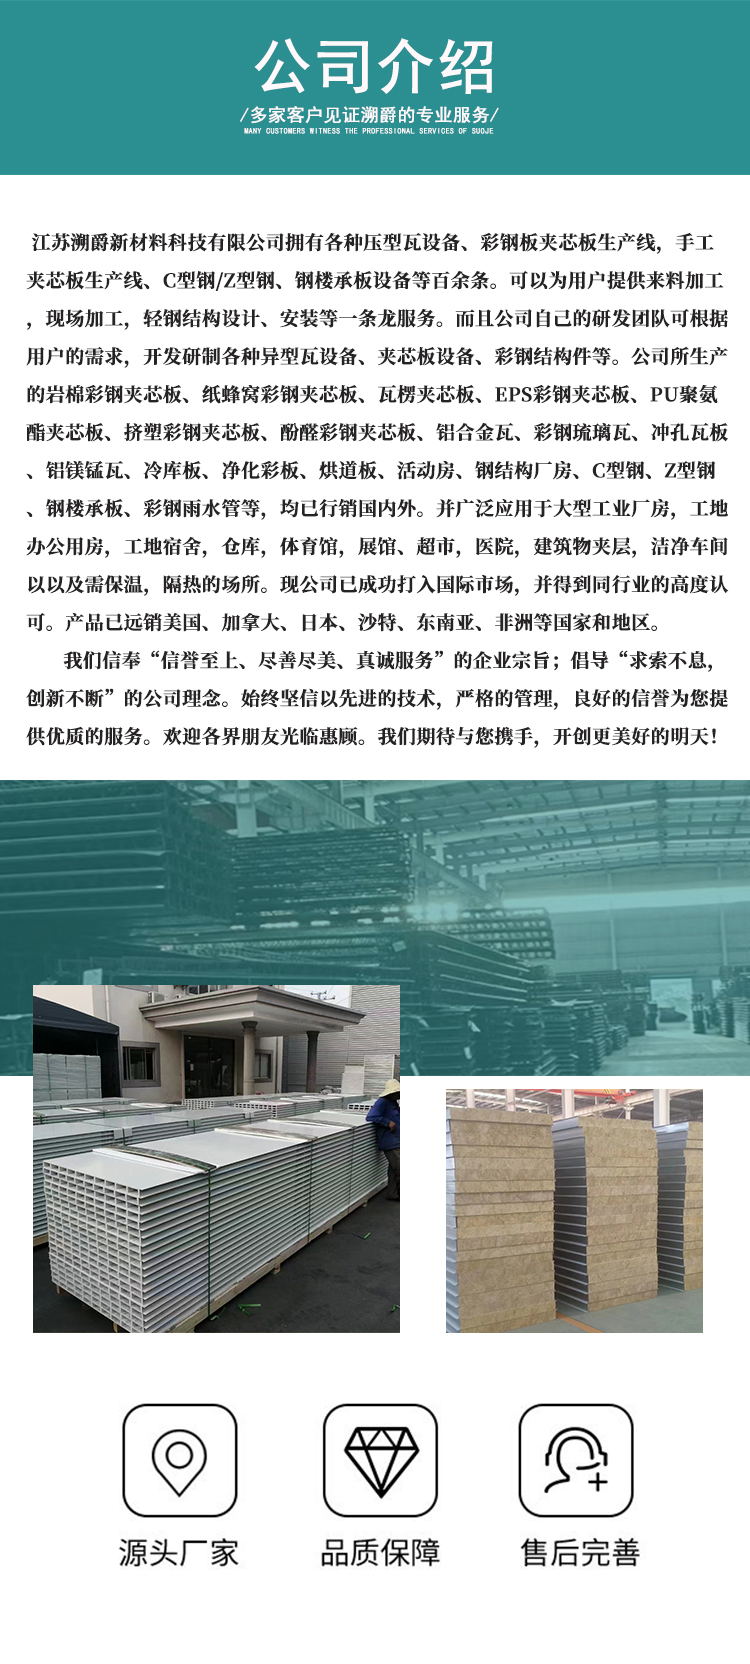 Manual purification board, rock wool clean board, flame retardant and insulated food workshop partition board